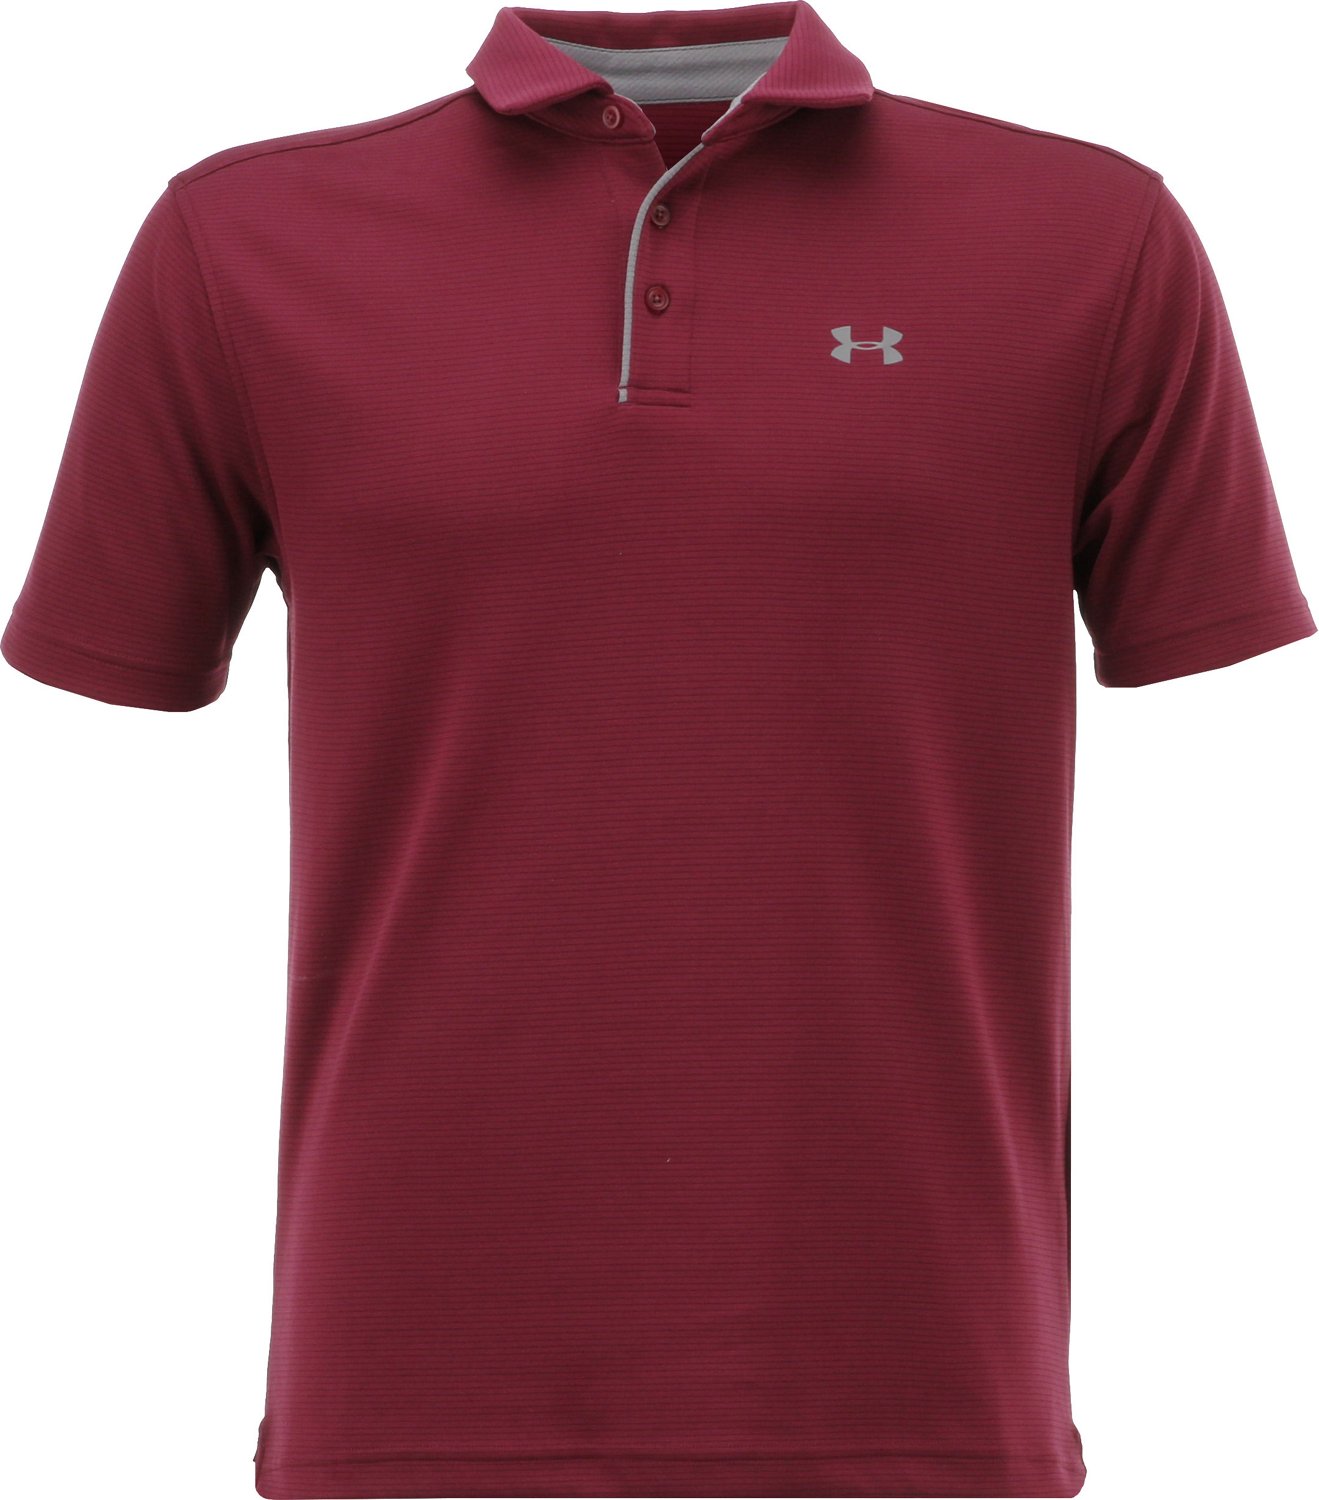 Under Armour Men's New Tech Polo Shirt | Free Shipping at Academy